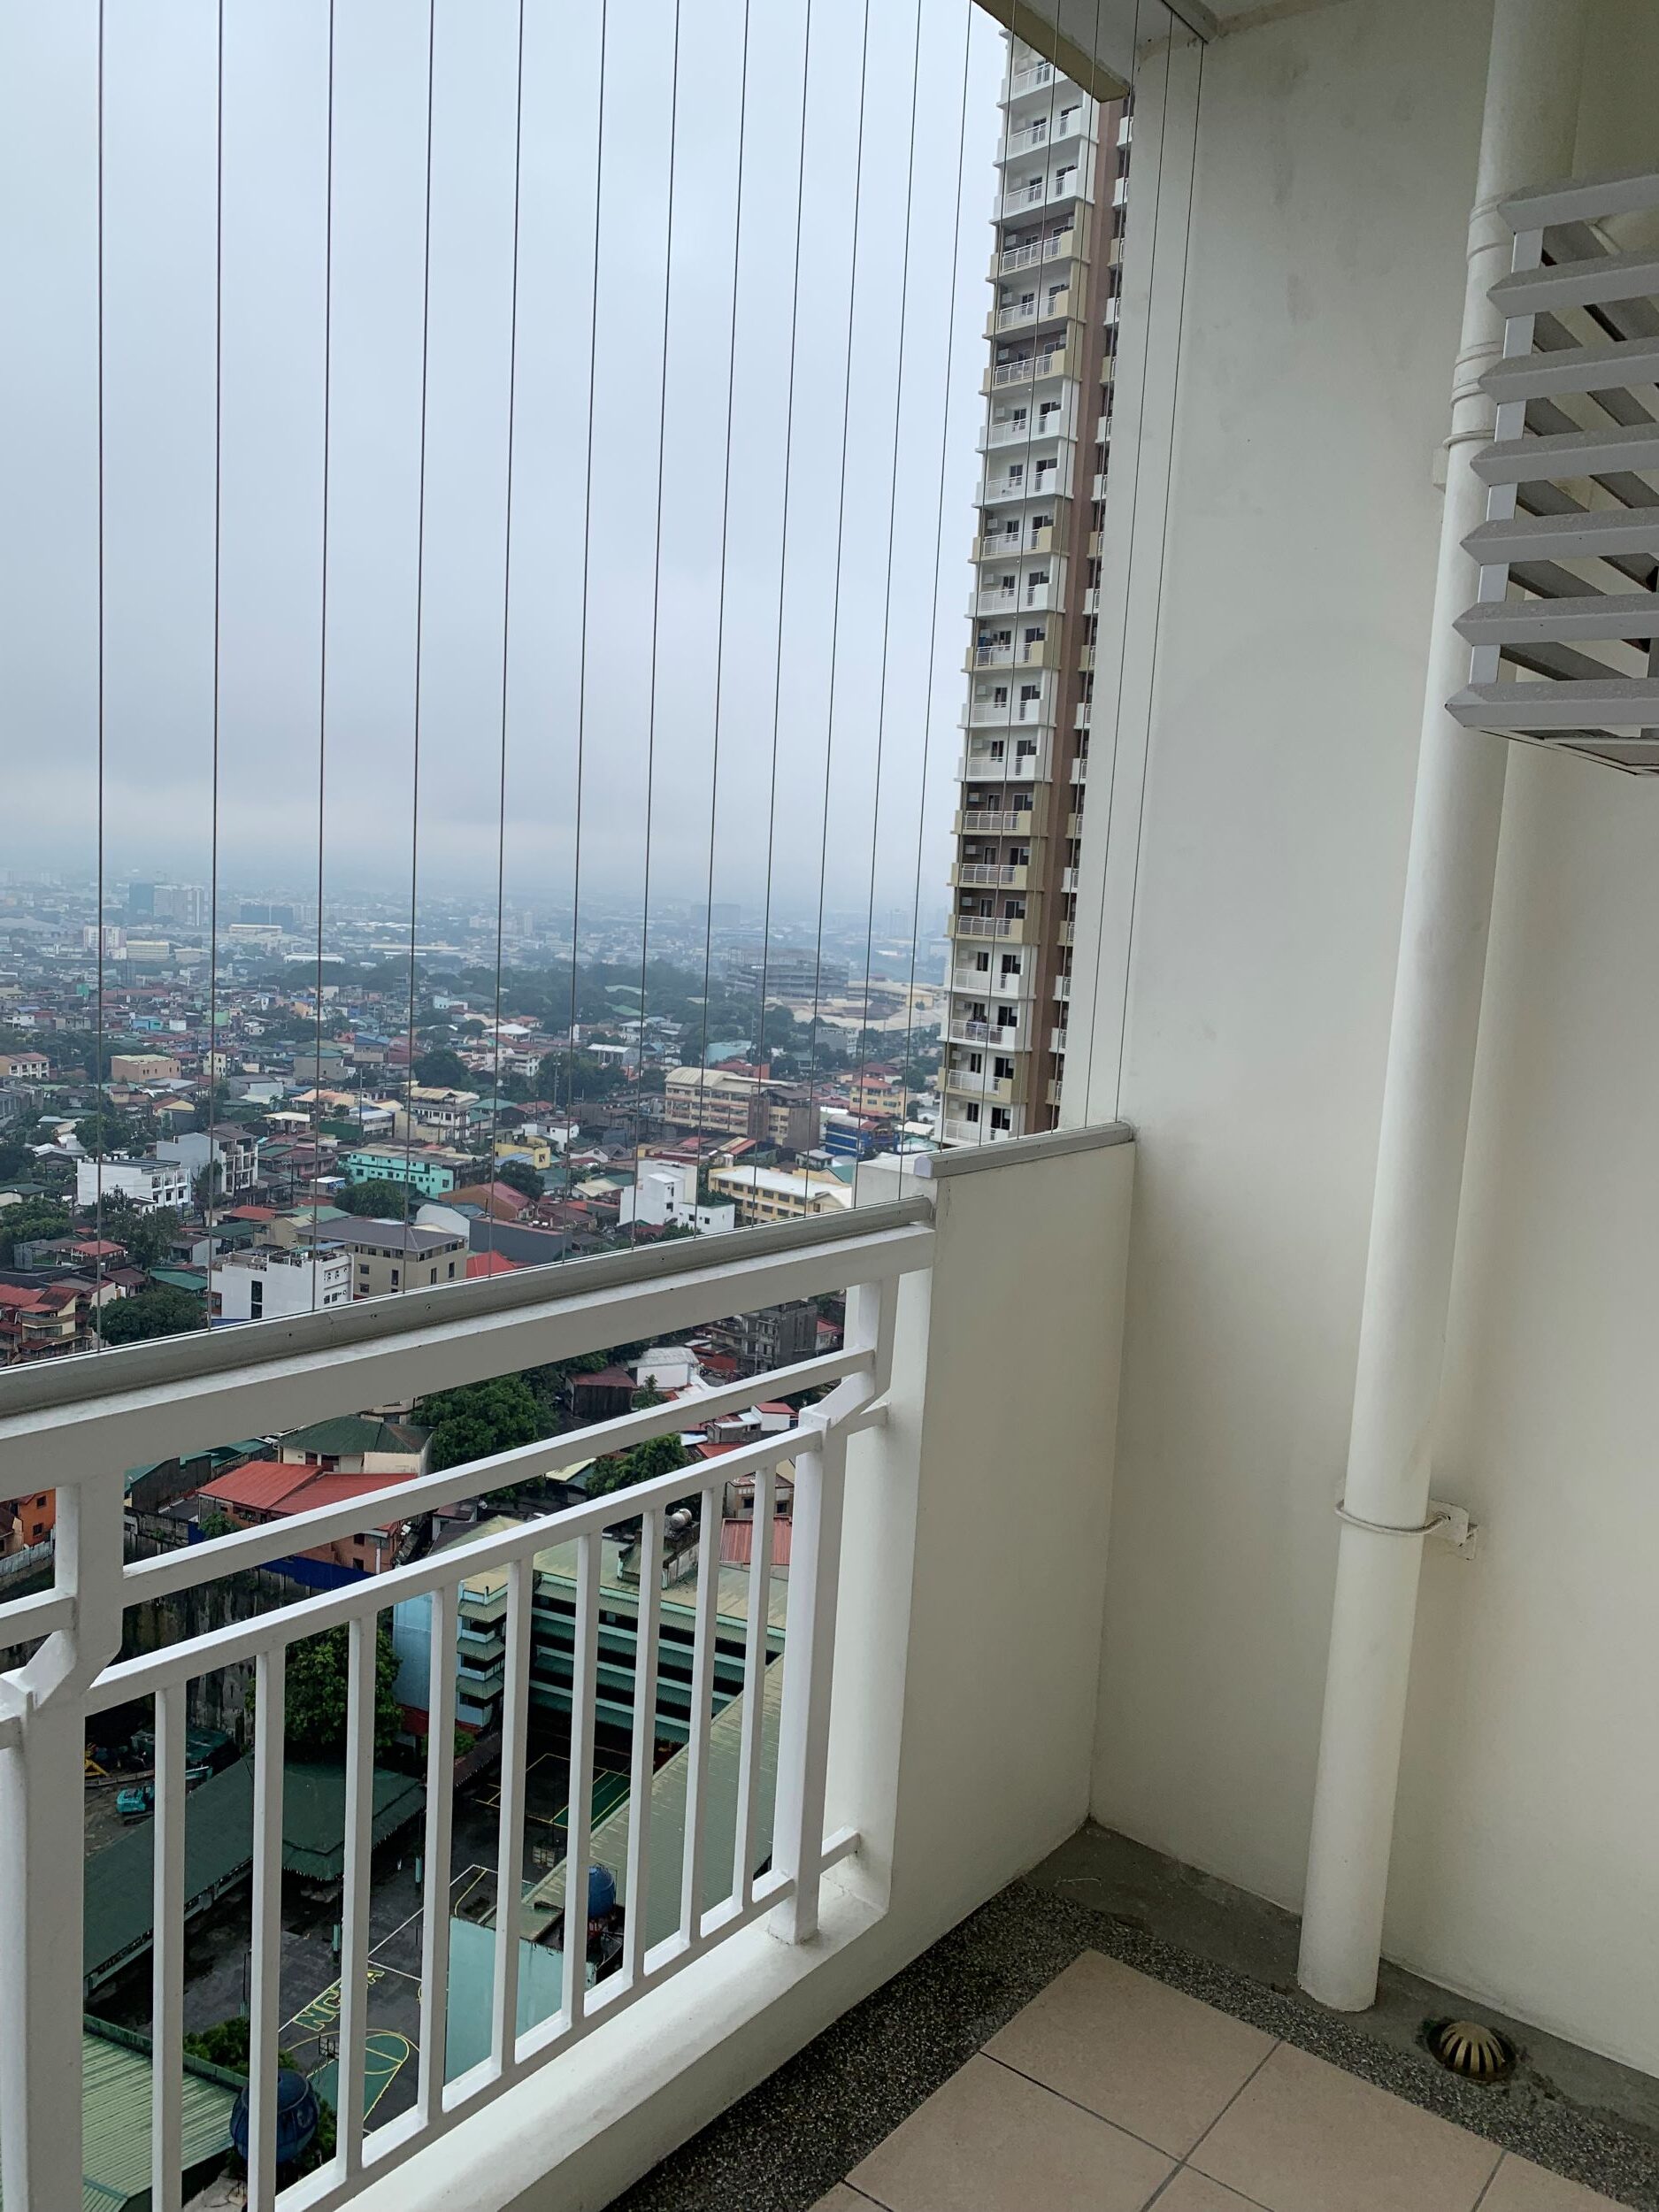 Fully Furnished 2BR Condo with Parking at Infina Towers, Quezon City